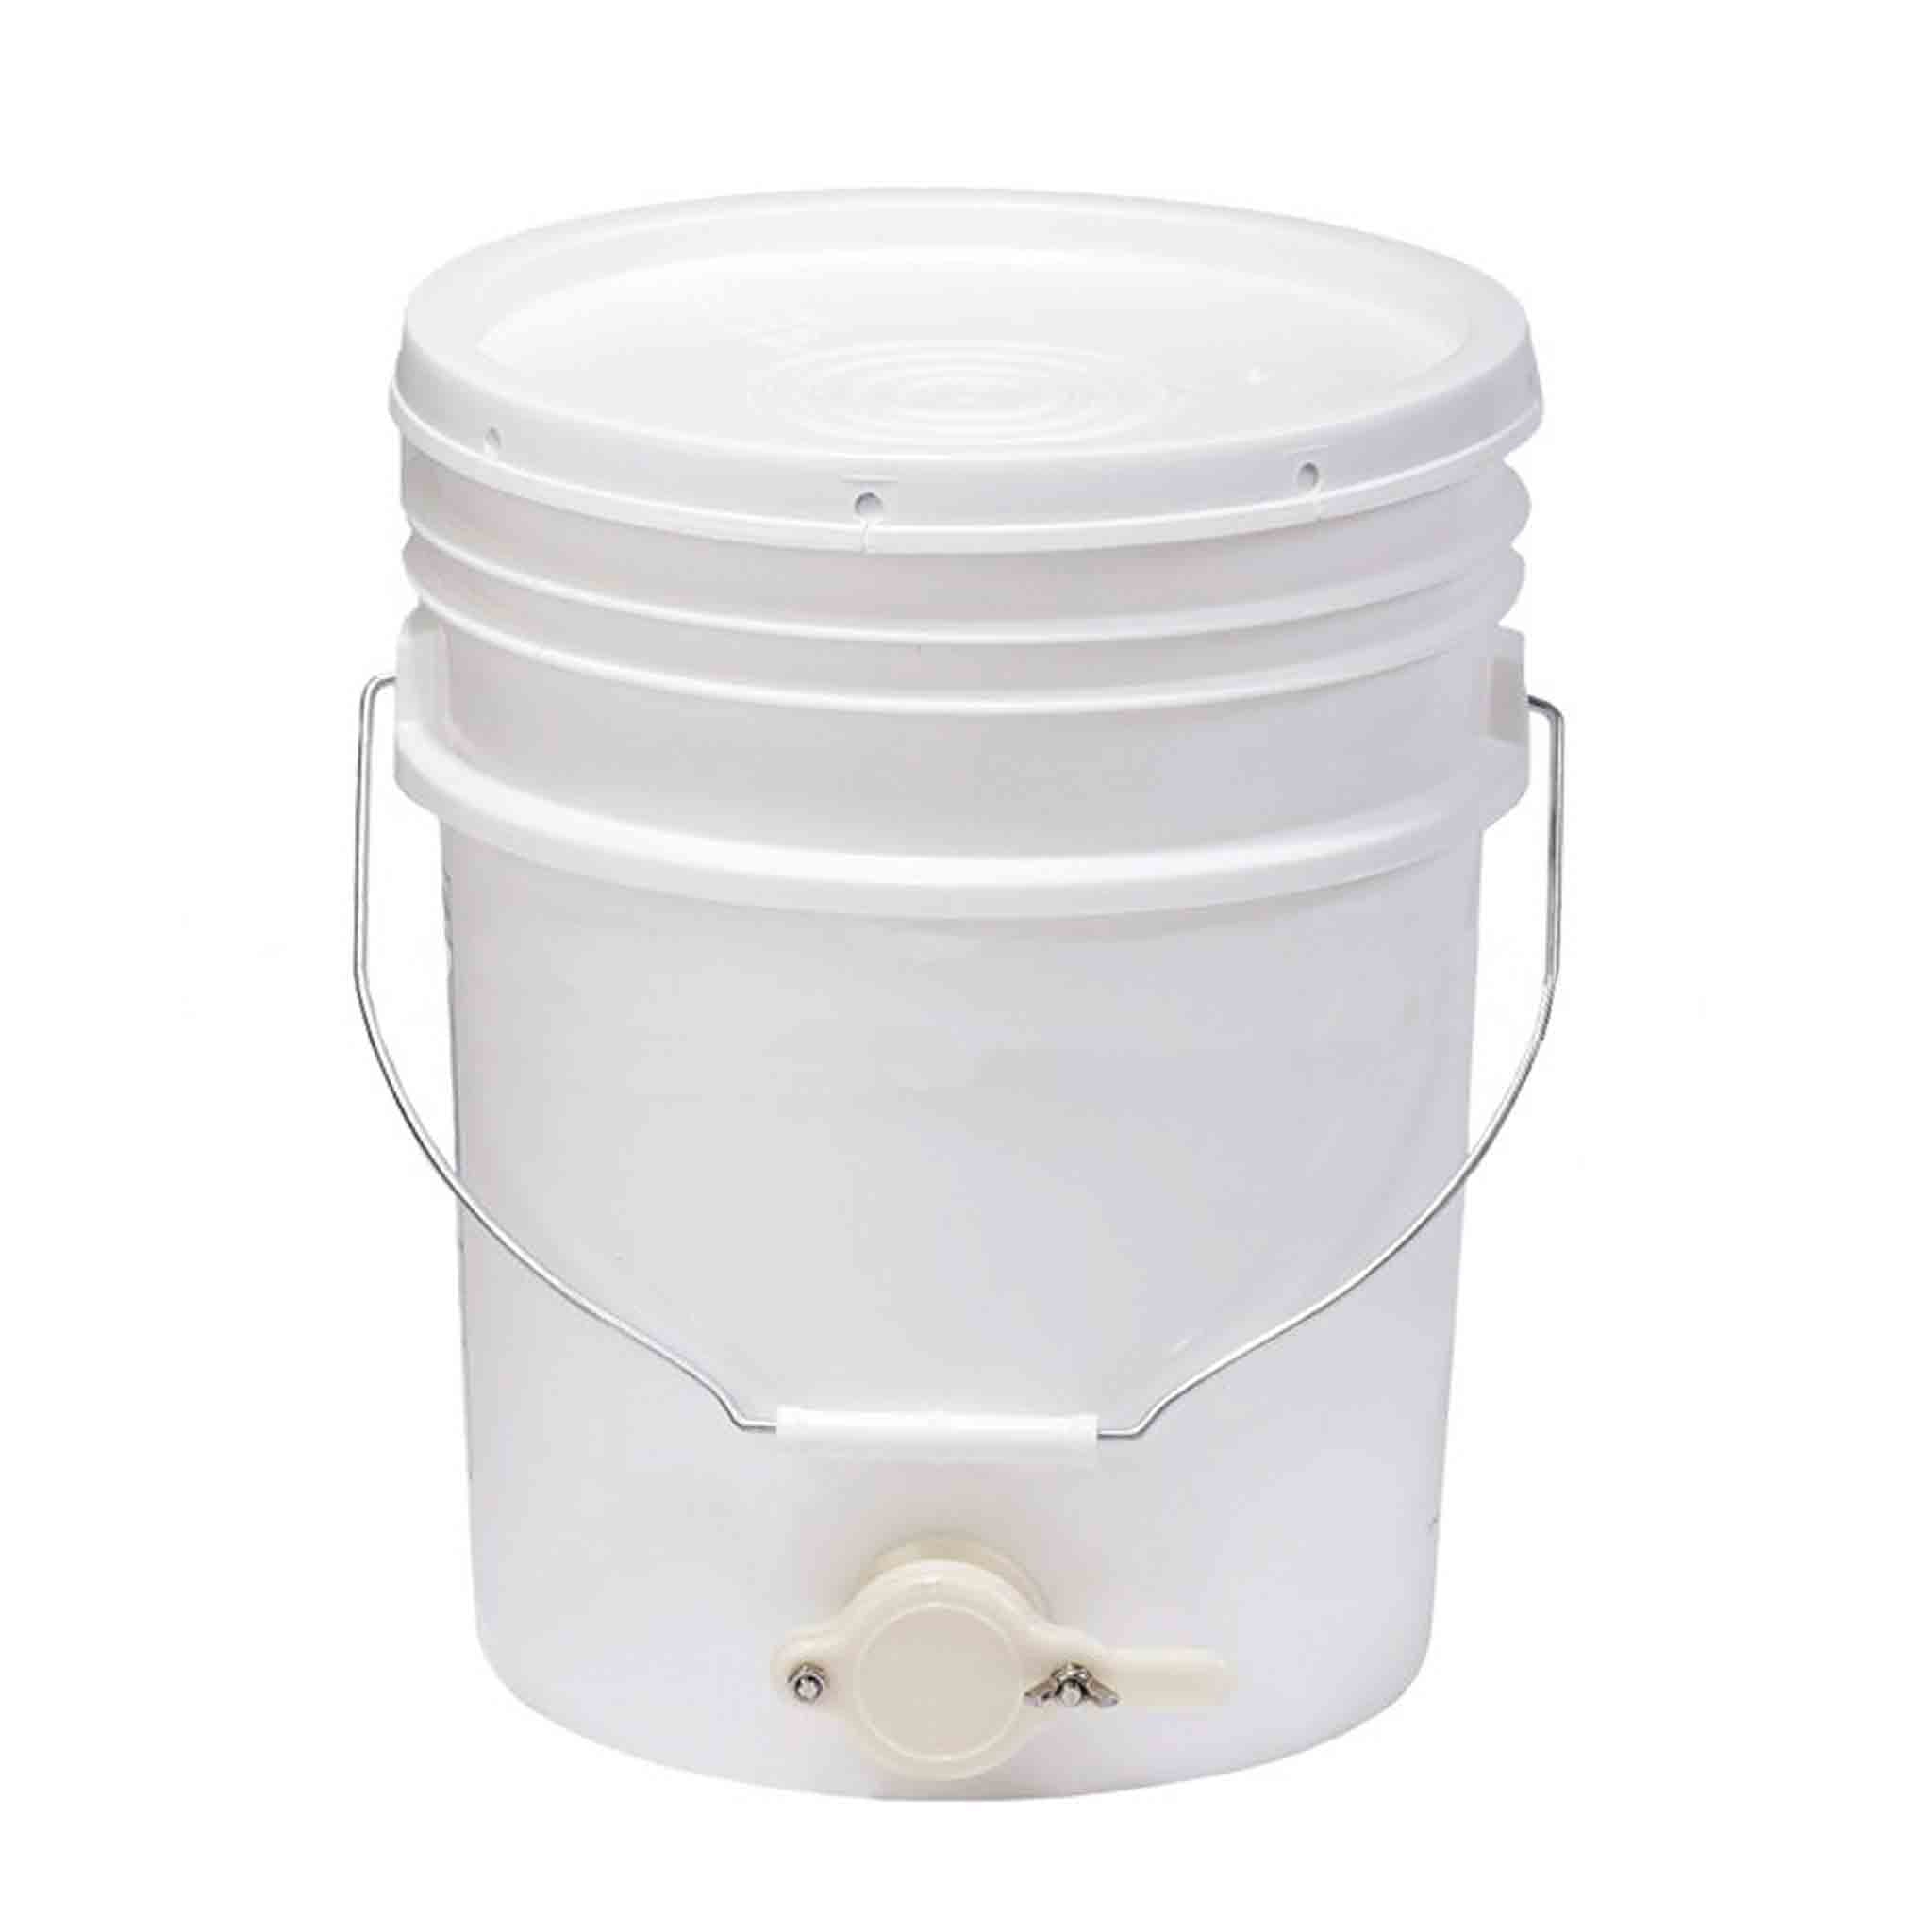 Honey Bucket with Honey Tap/Gate - Processing collection by Buzzbee Beekeeping Supplies